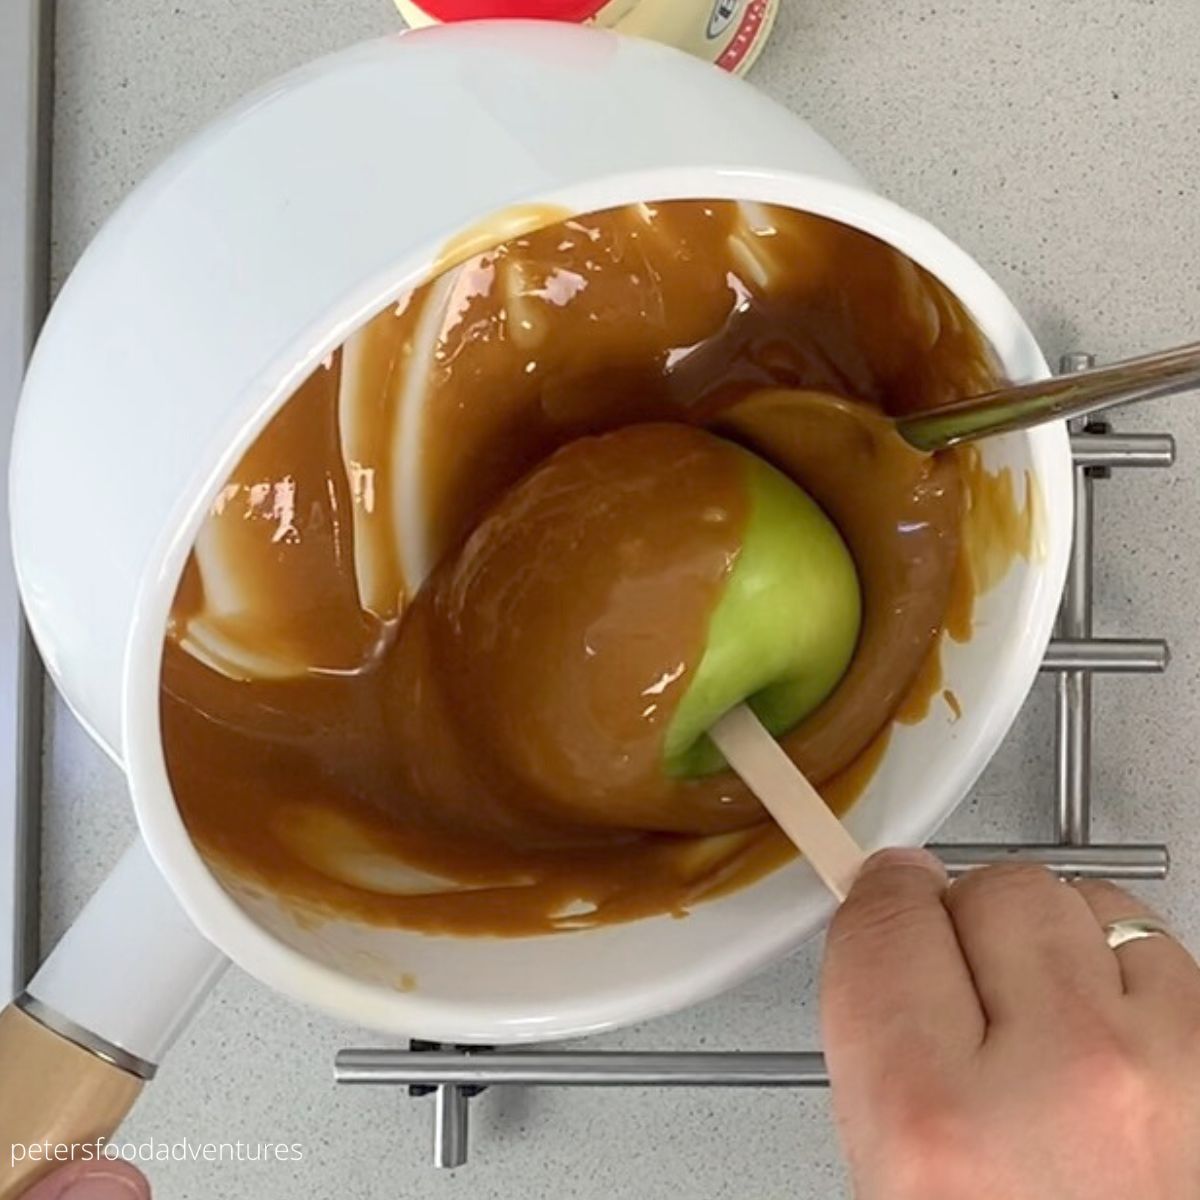 dipping apples in caramel